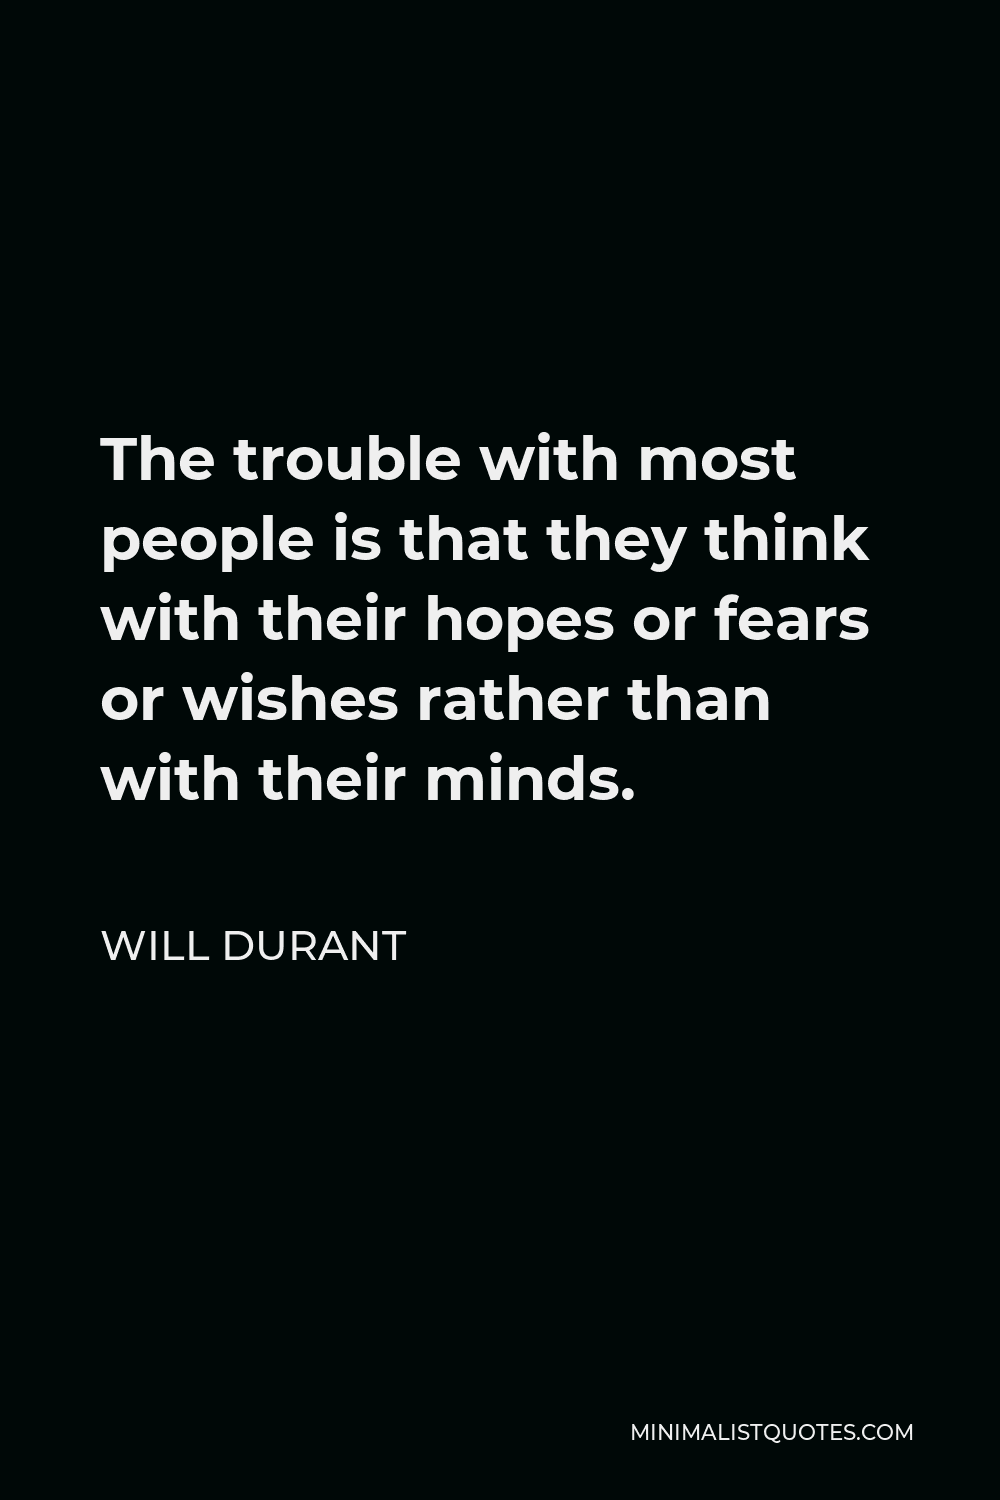 Will Durant Quote - The trouble with most people is that they think with their hopes or fears or wishes rather than with their minds.